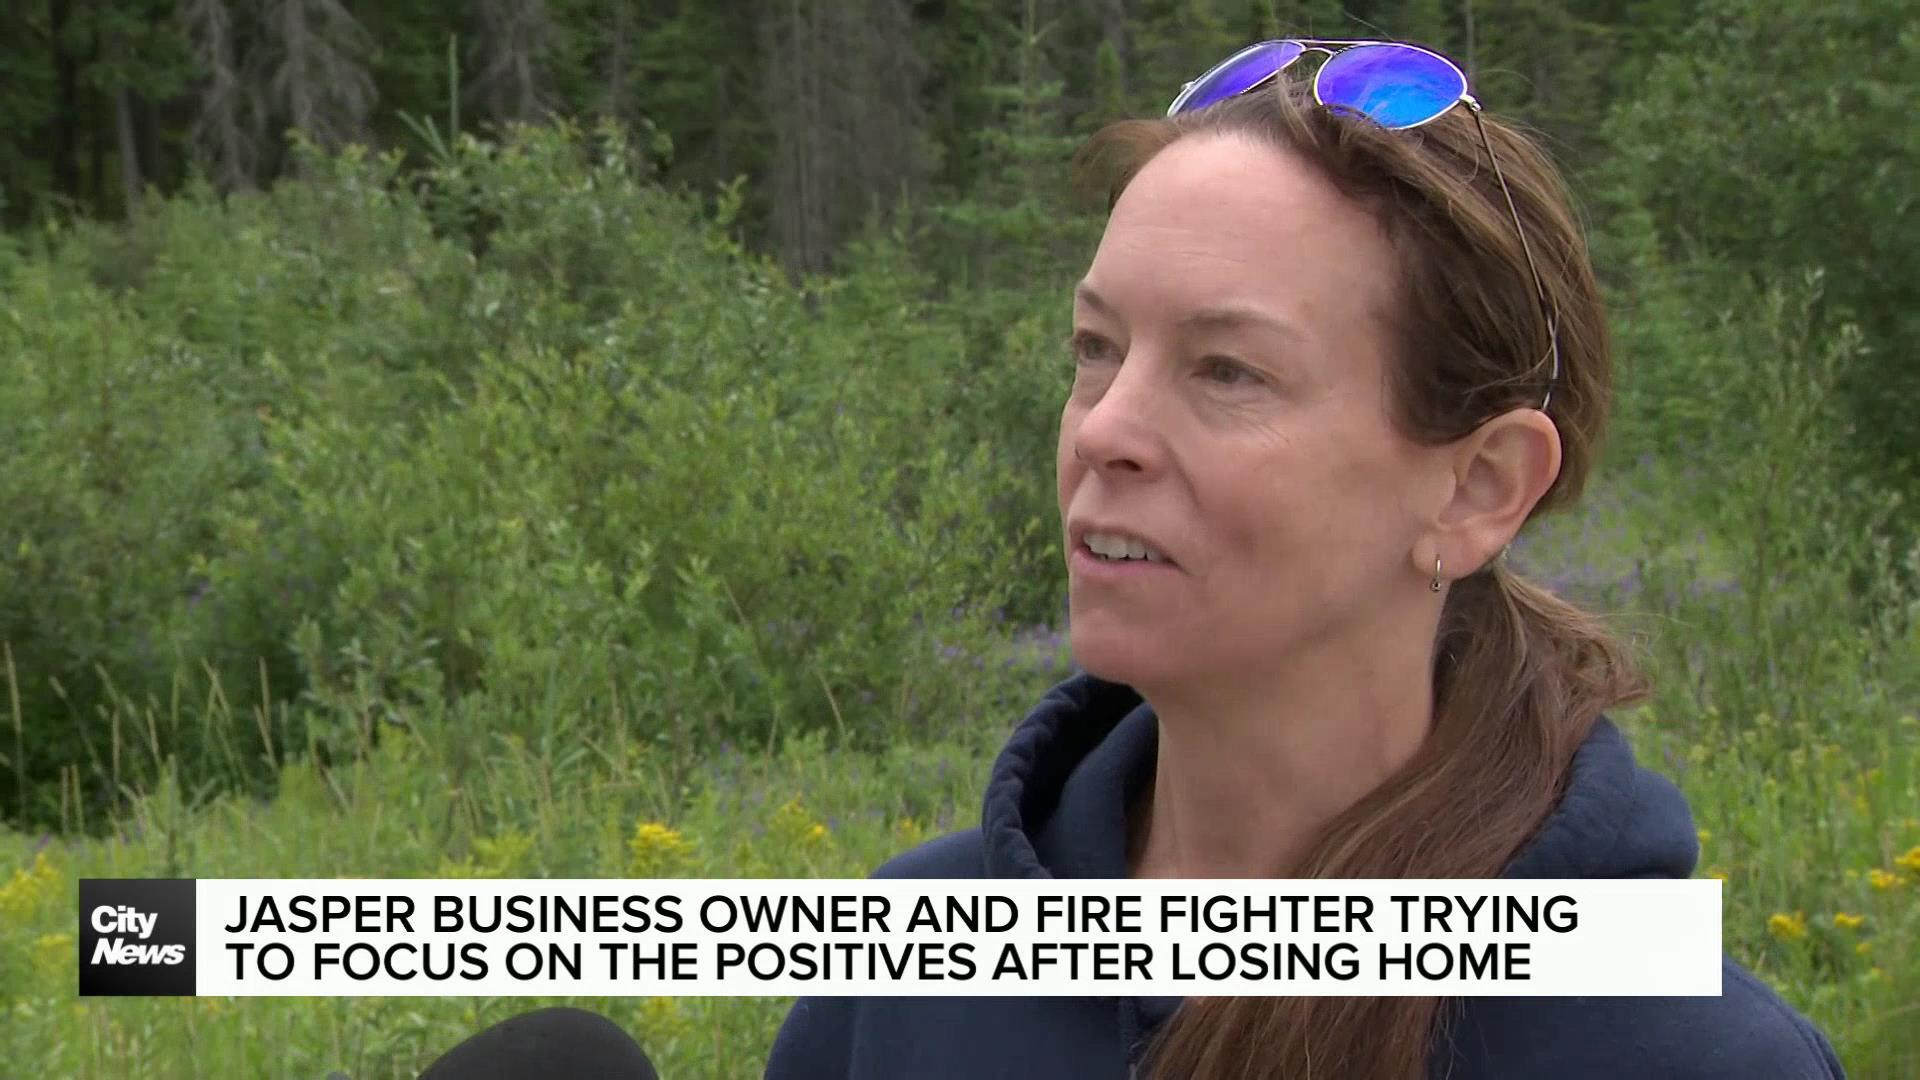 Jasper business owner and firefighter focusing on the positives after losing her home